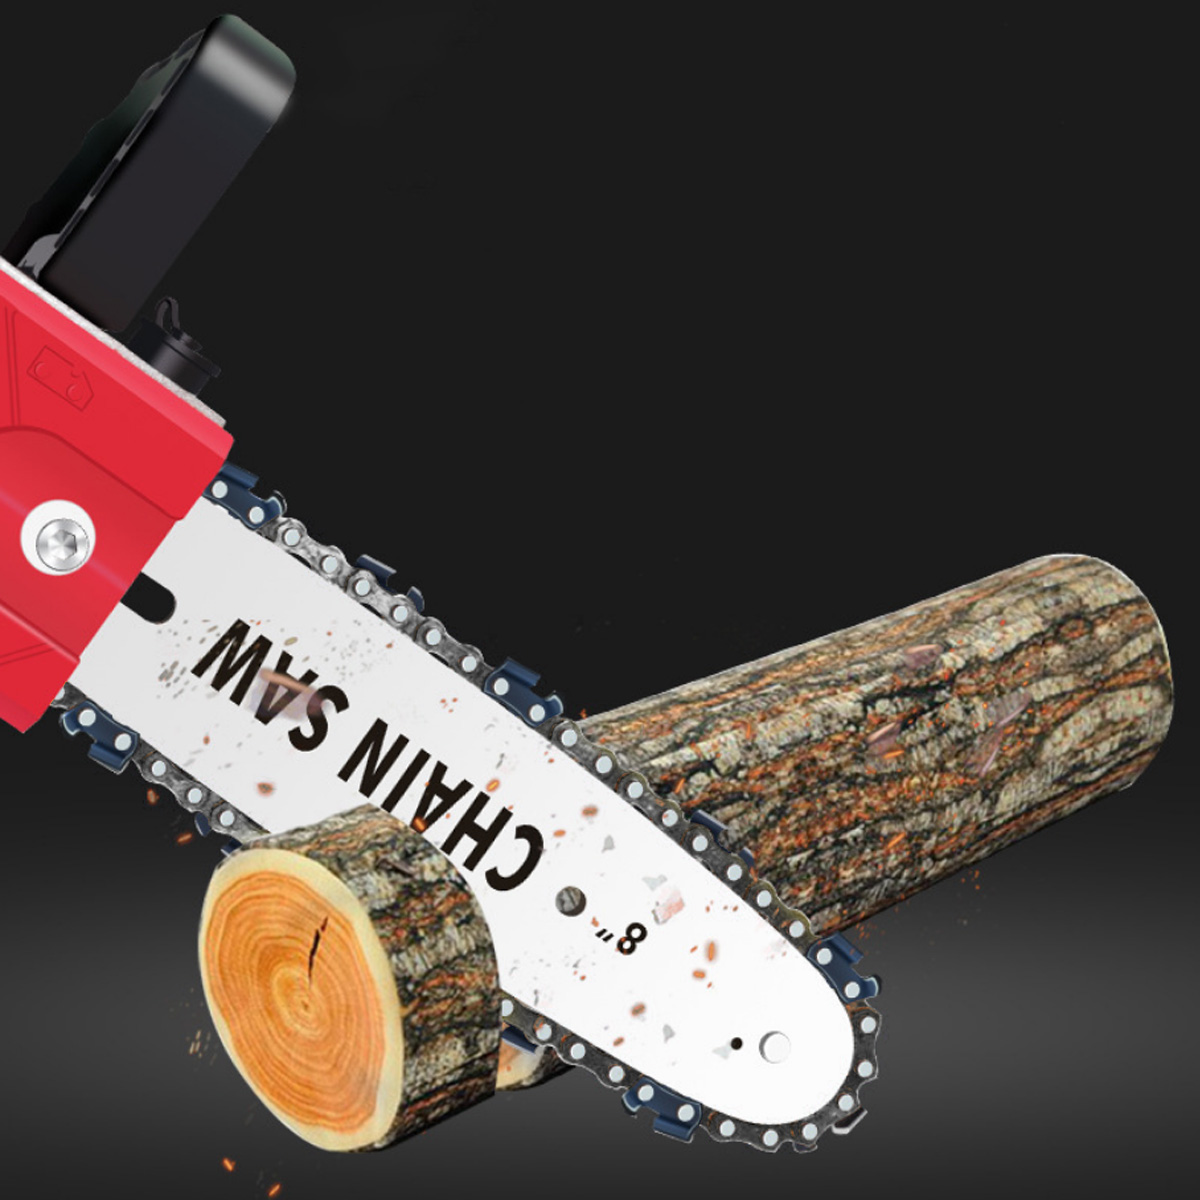 288VF-8Inch-Electric-Chain-Saw-Cordless-One-Hand-Chainsaw-Woodworking-Tool-W-12None-Battery-1845268-7